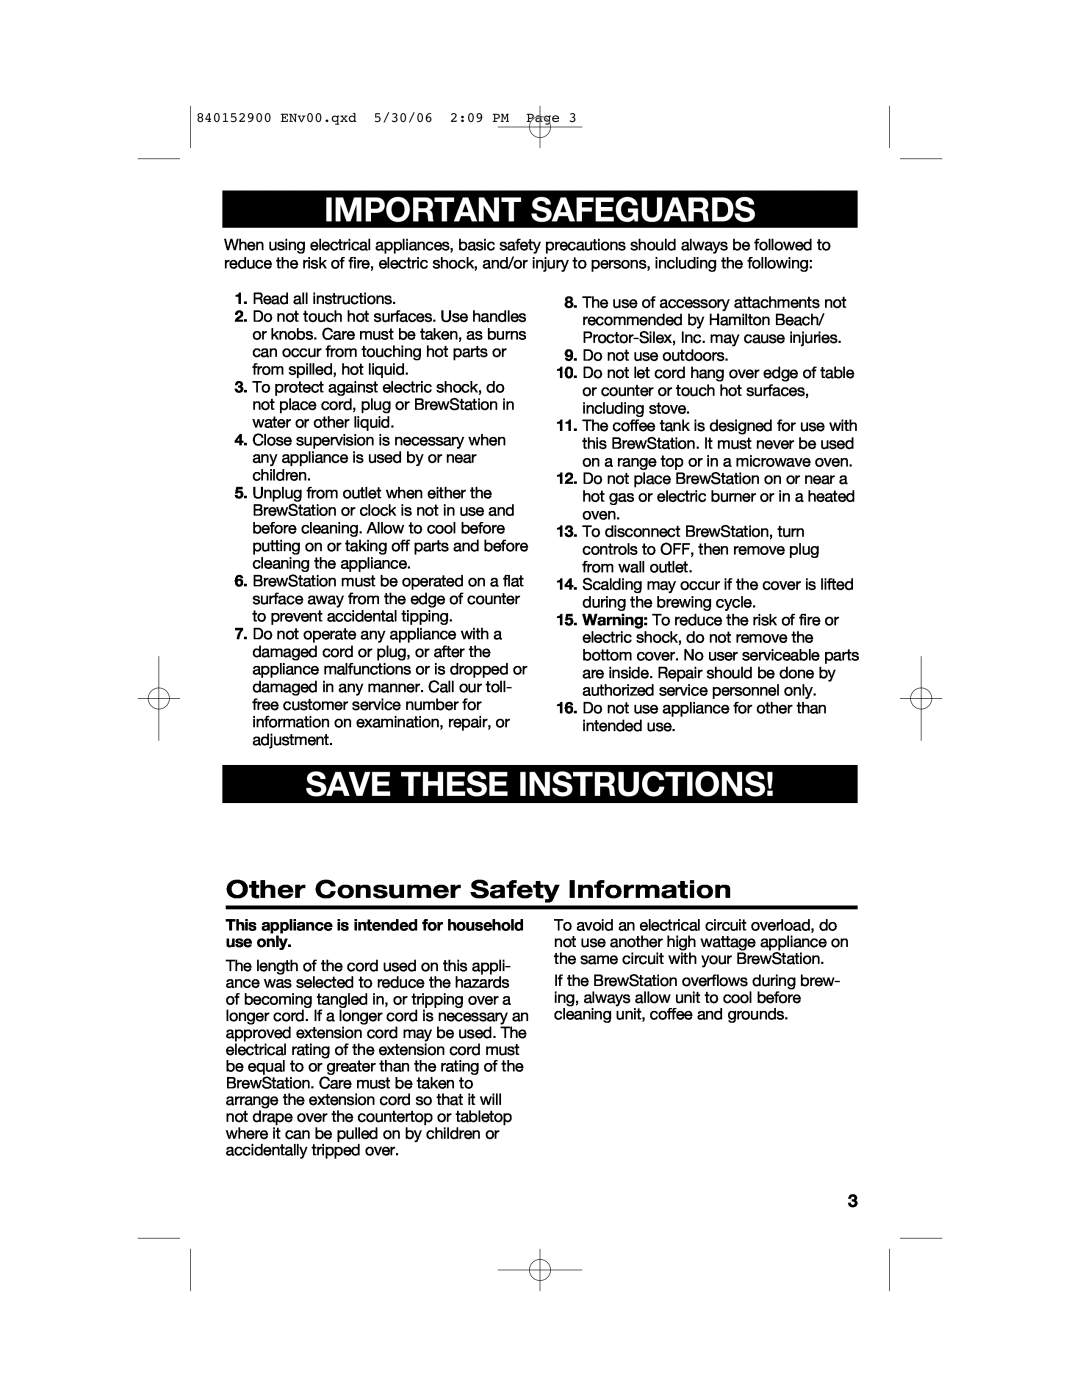 Hamilton Beach 47535C manual Important Safeguards, Save These Instructions, Other Consumer Safety Information 